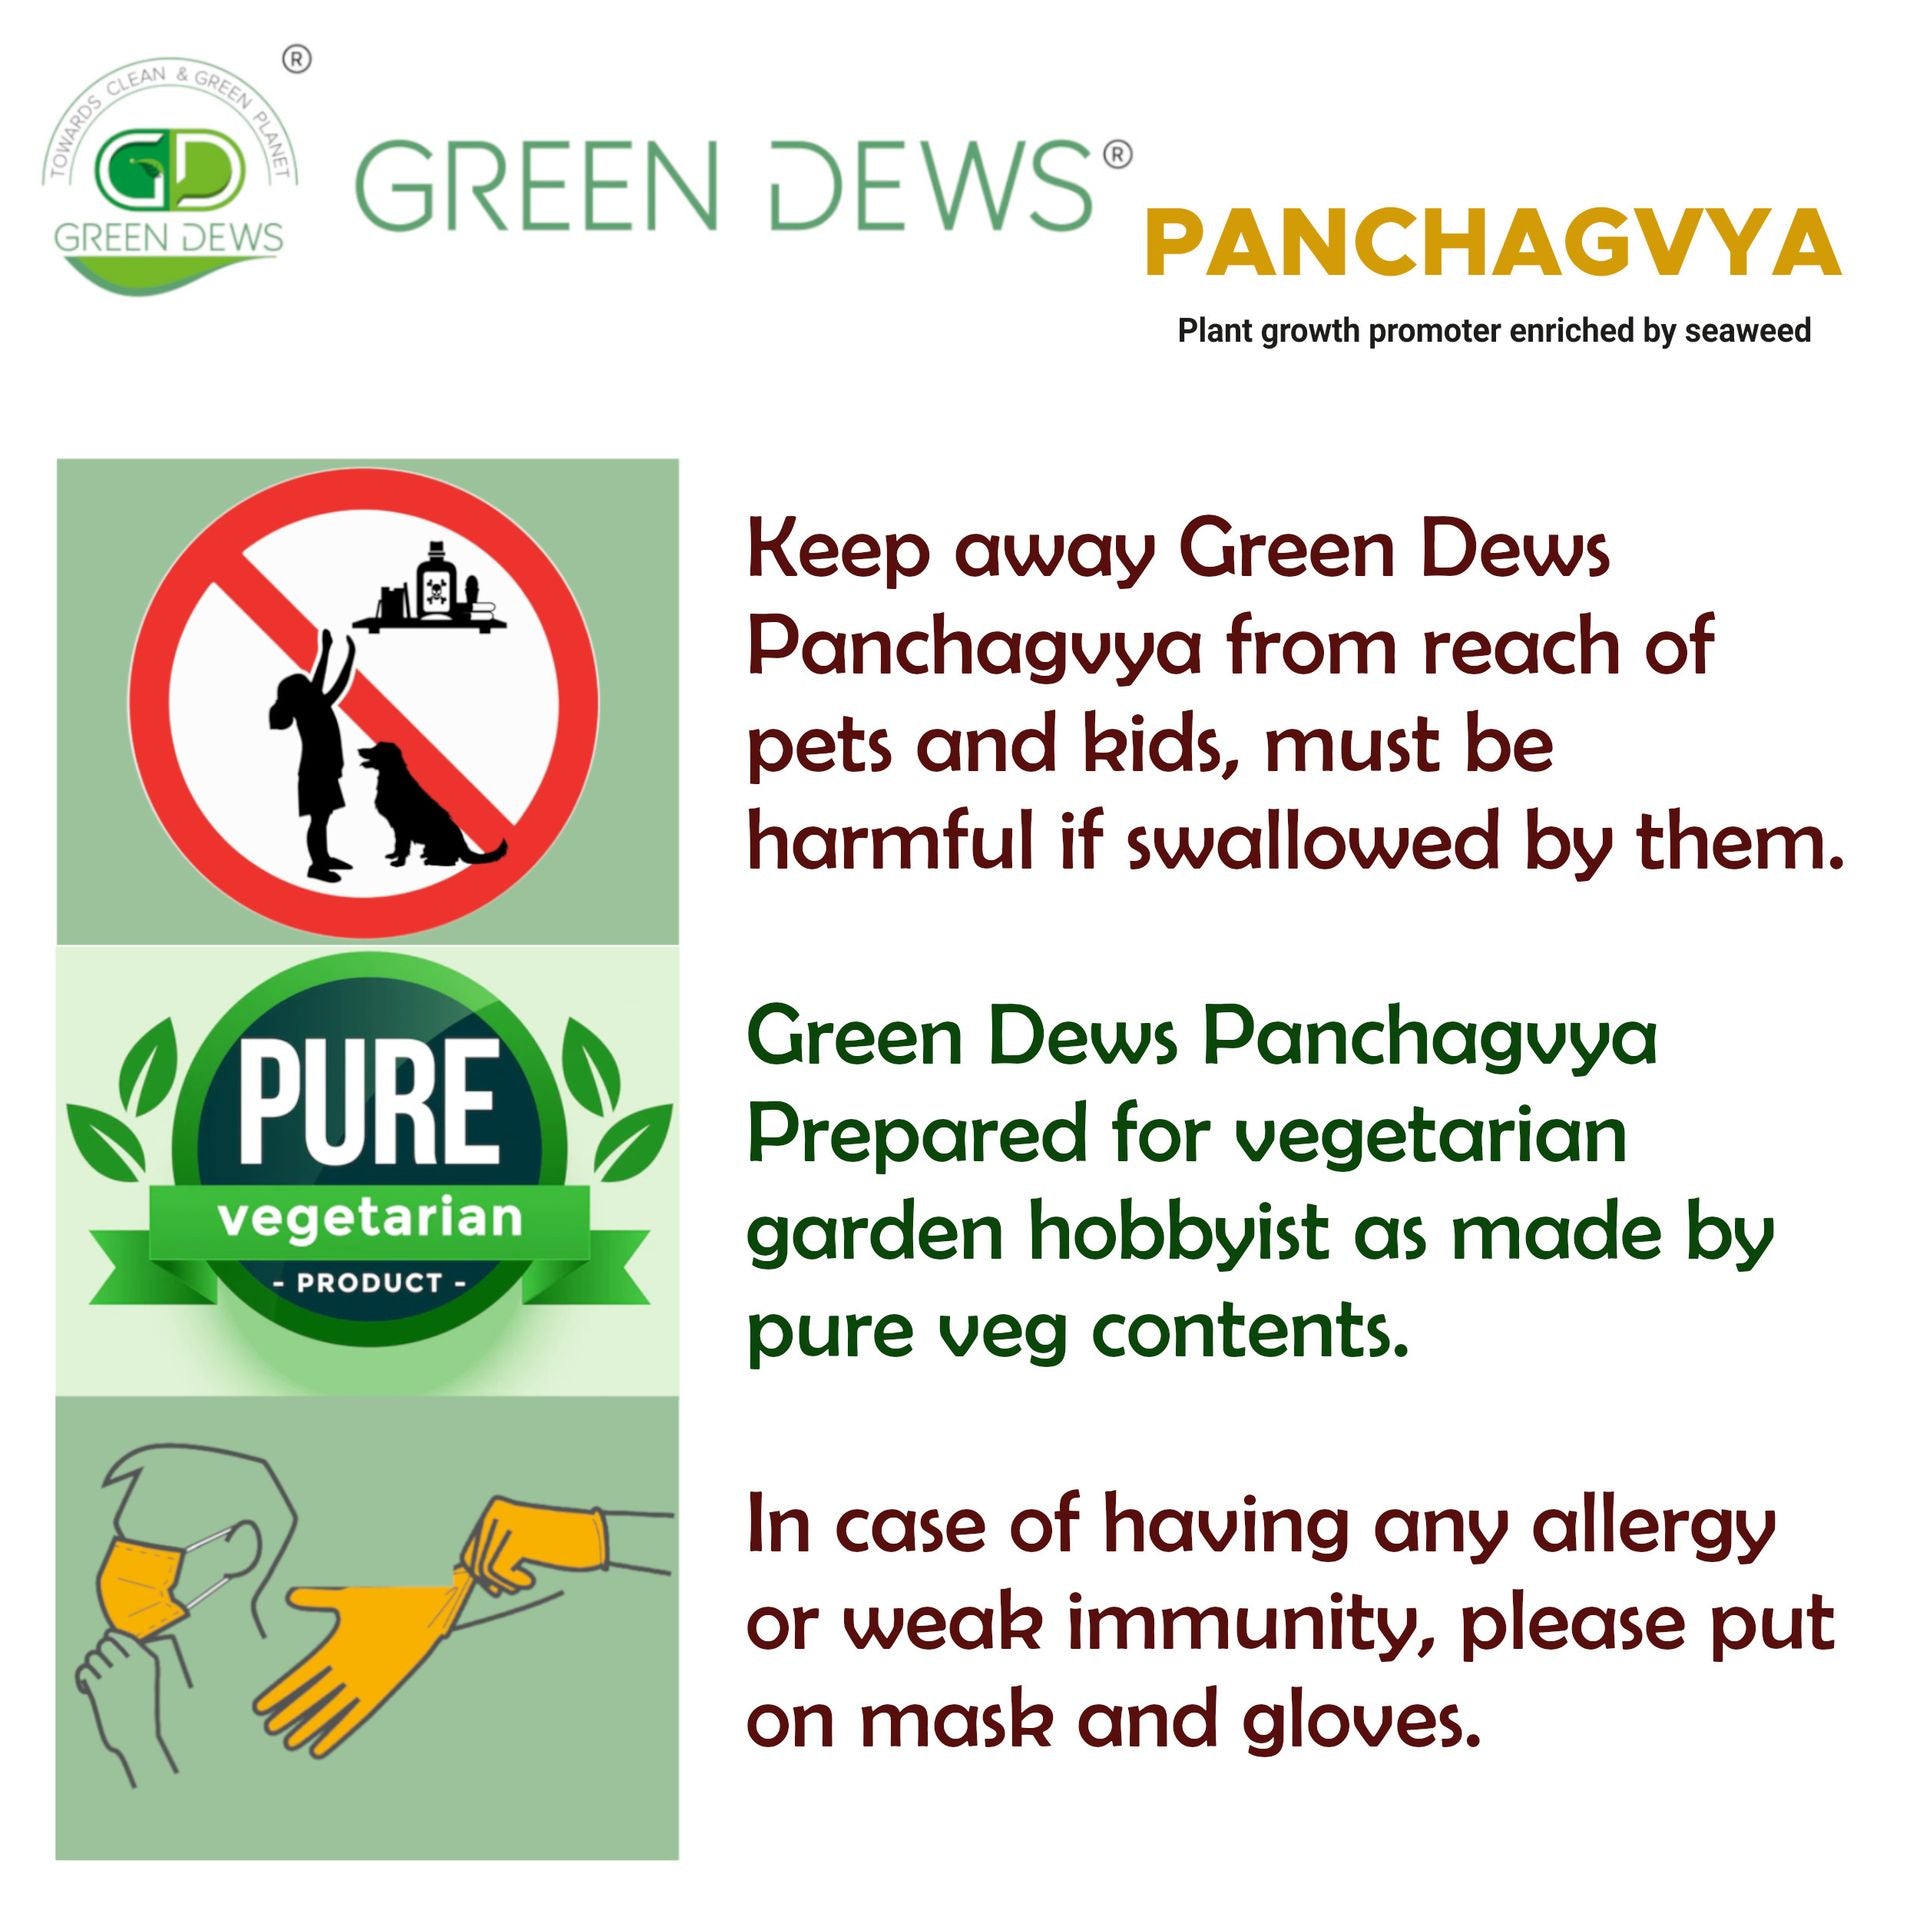 Green Dews Panchagavya Organic Fertilizer Plant Growth Promoter Enriched with Seaweed for home garden - hfnl!fe